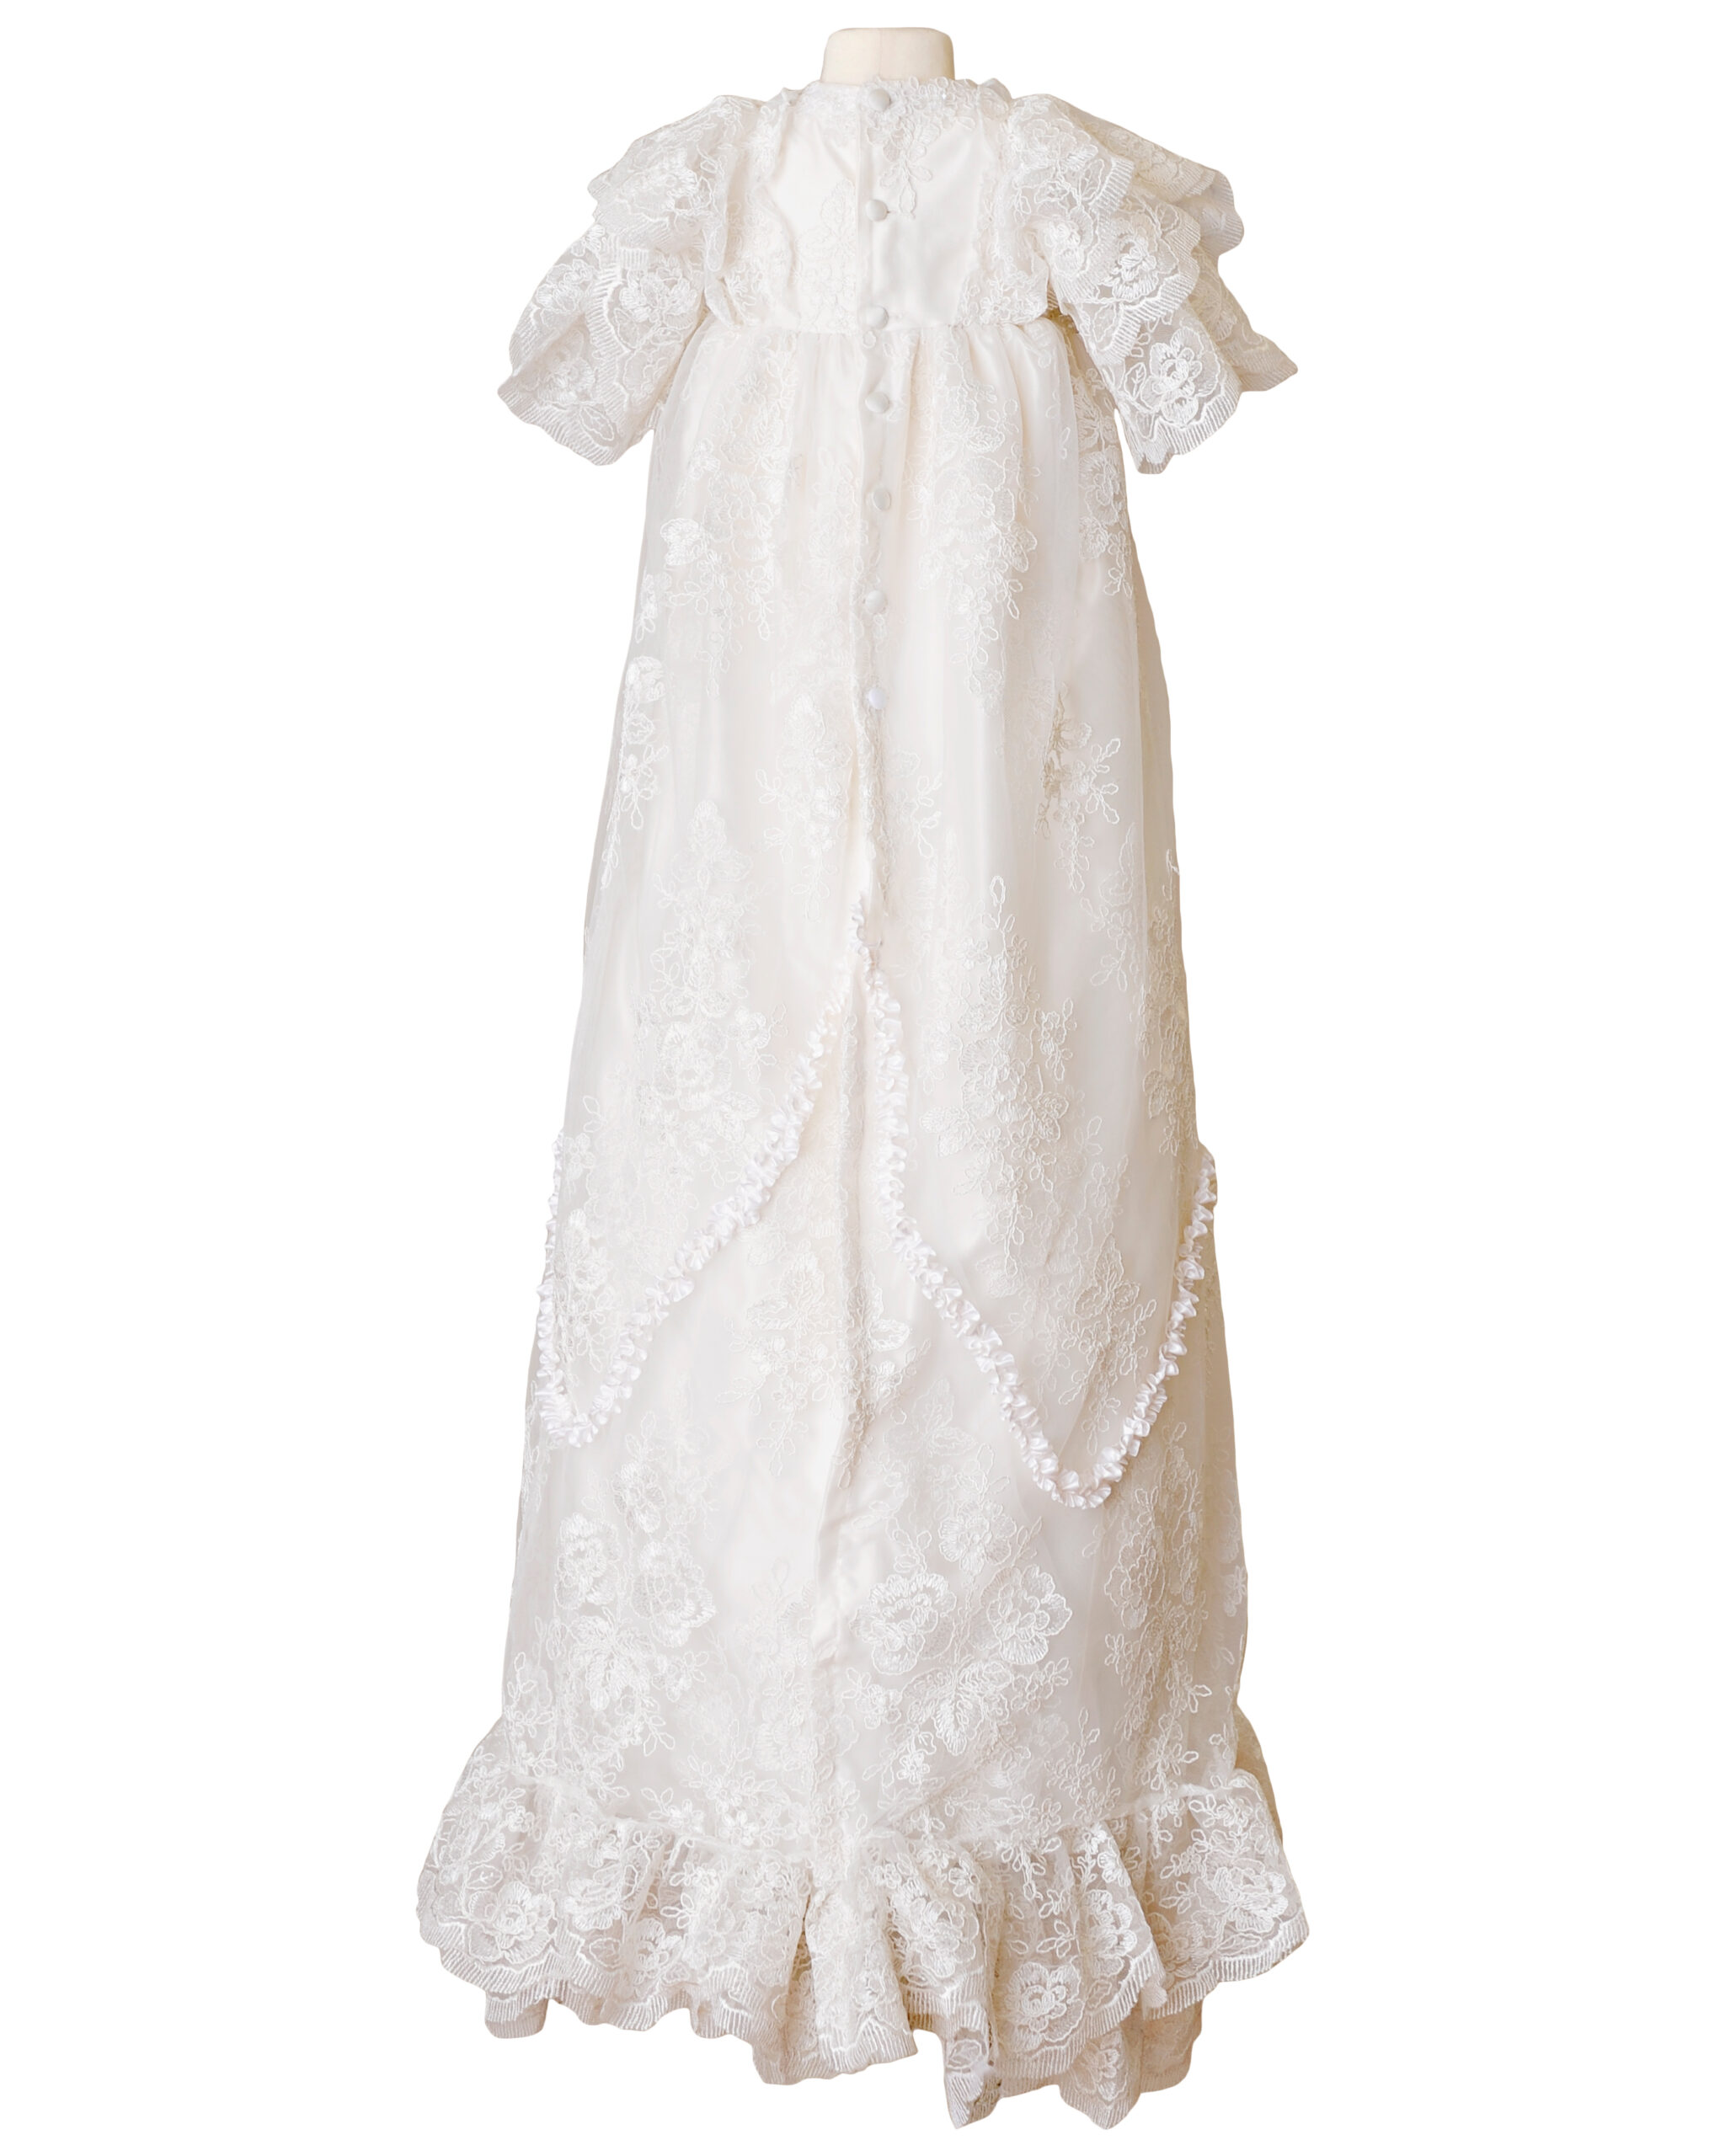 Royal Christening Gown back